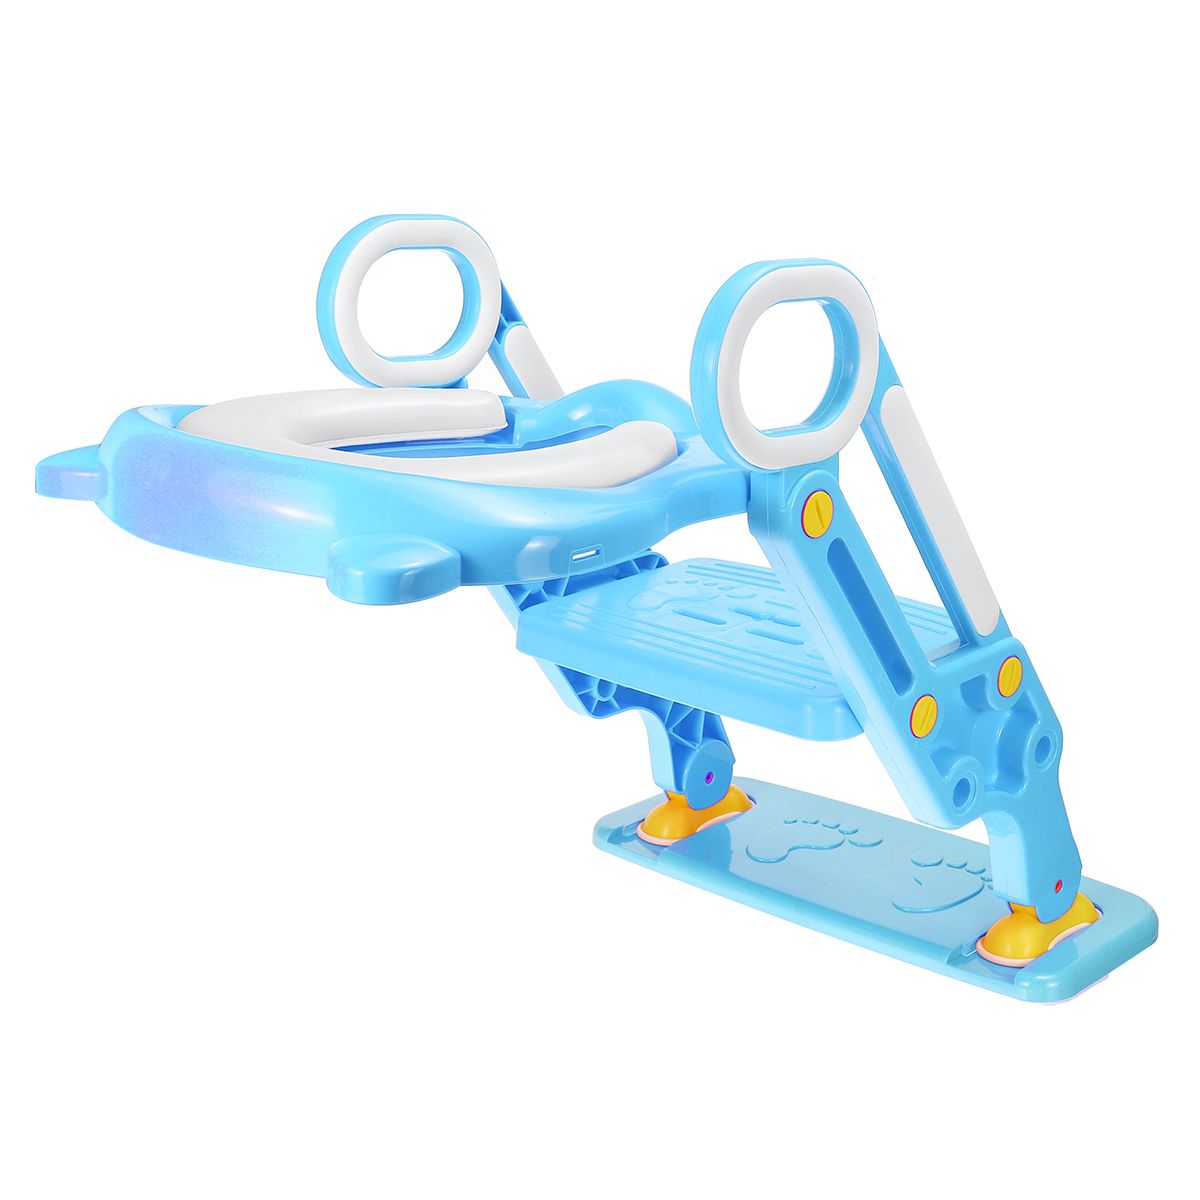 38018080-mm-Auxiliary-Toilet-Ladder-Kids-Potty-Training-Seat-1621007